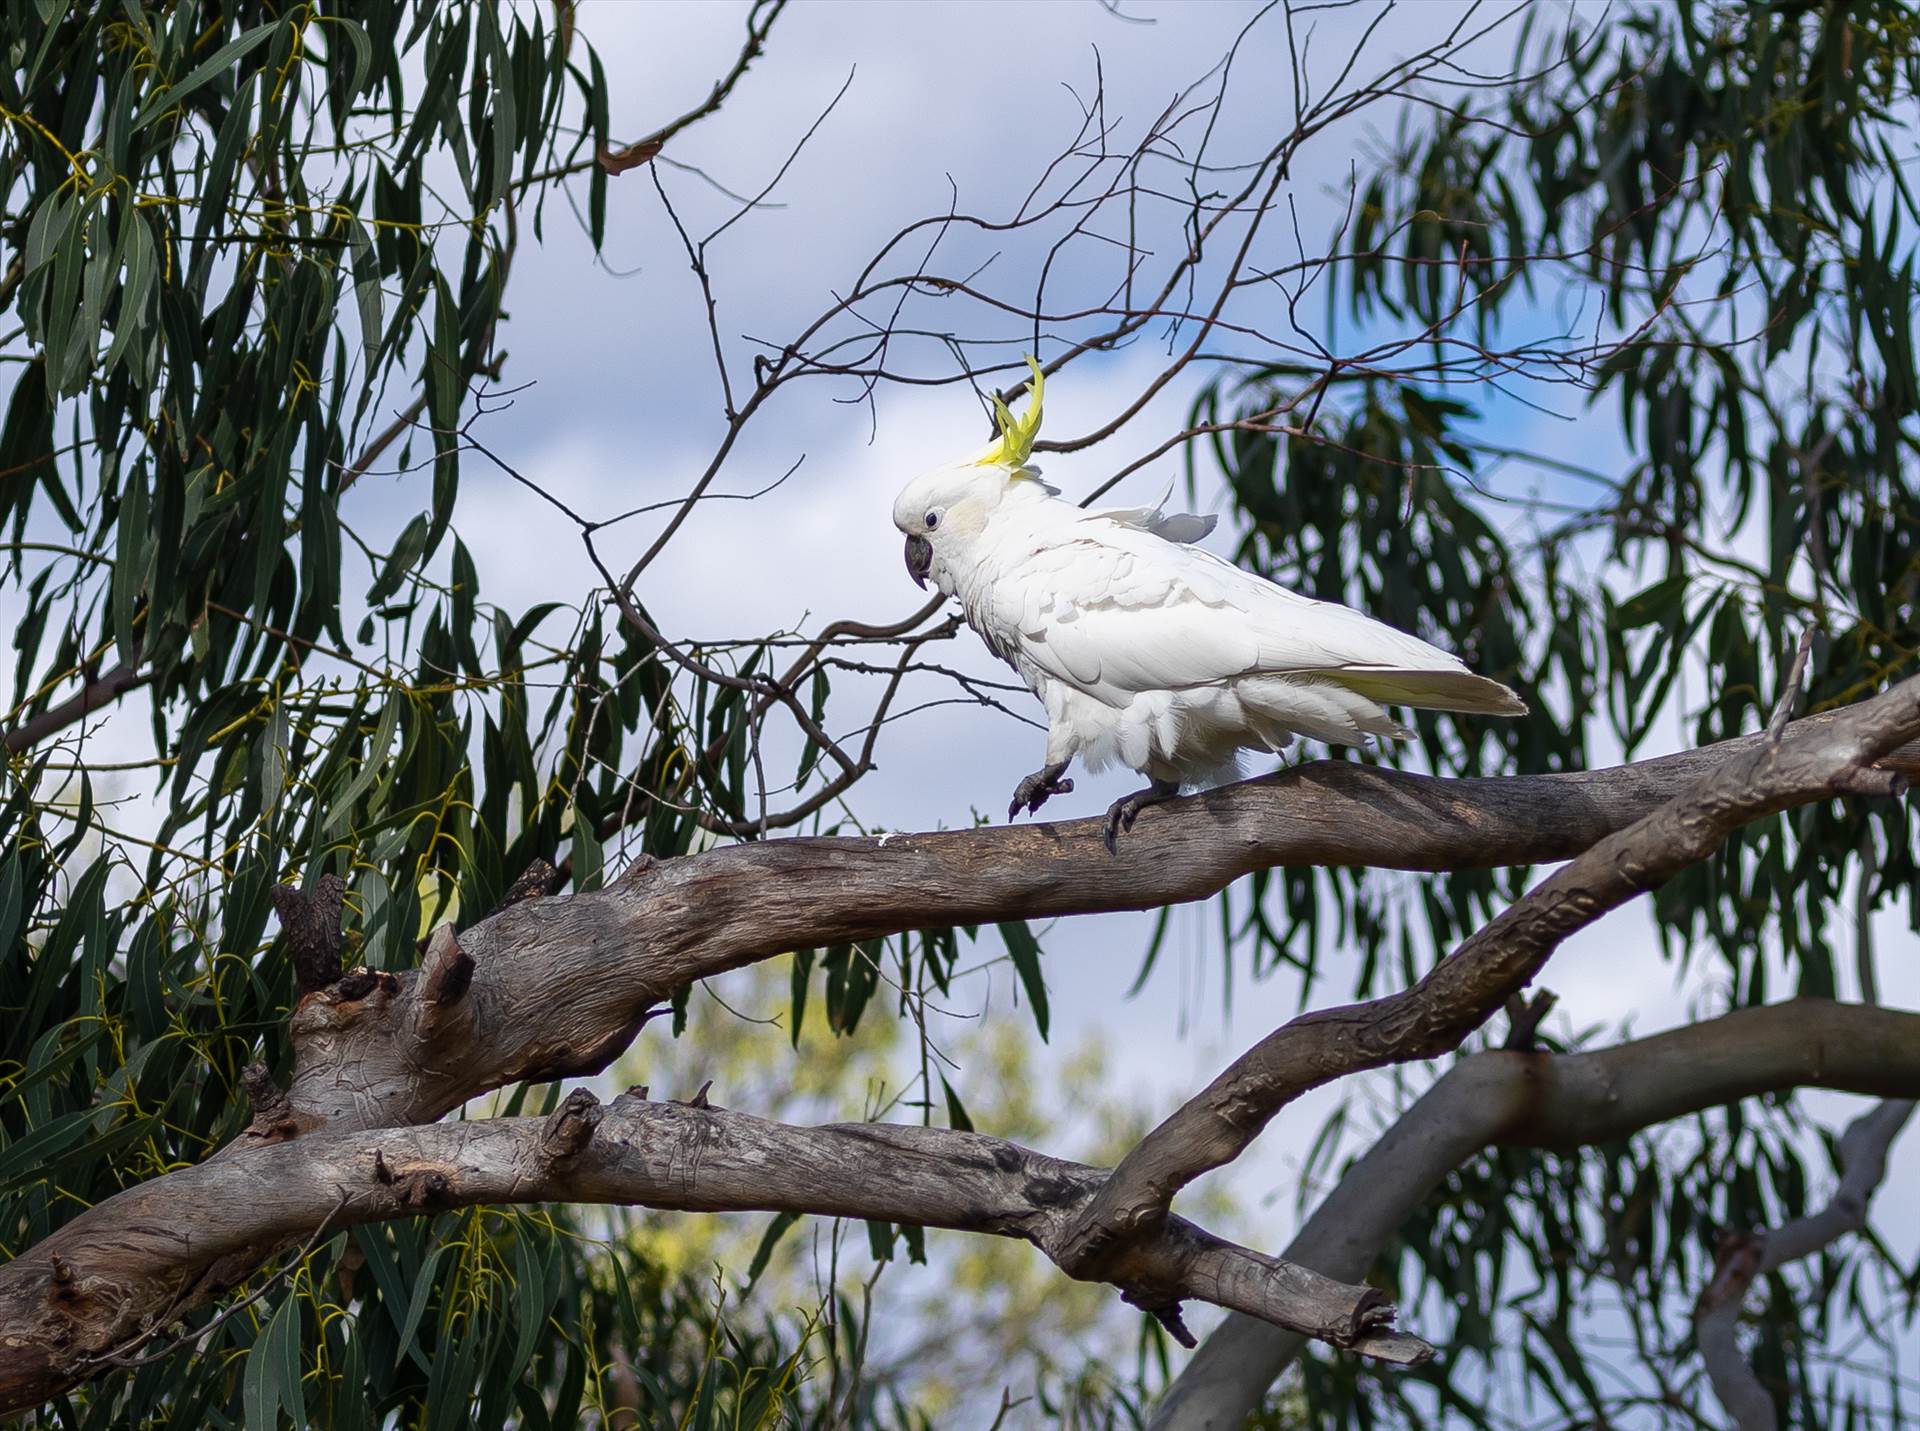 Sulphur-crested cockatoo Sulphur-crested cockatoo by johntorcasio